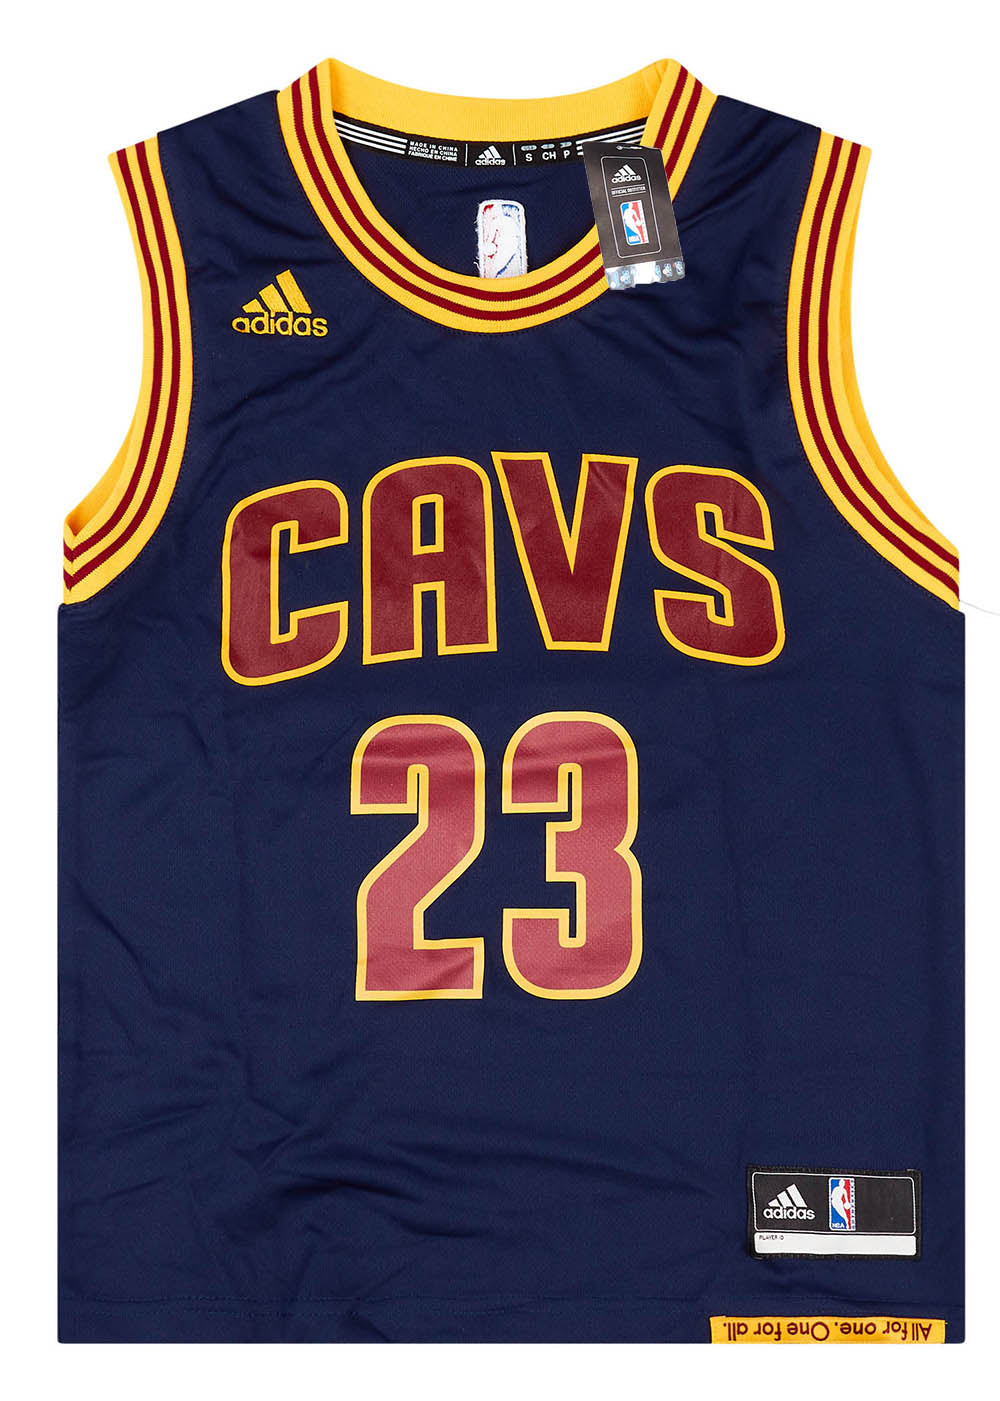 2014-17 CLEVELAND CAVALIERS JAMES #23 ADIDAS JERSEY (ALTERNATE) Y - W/TAGS